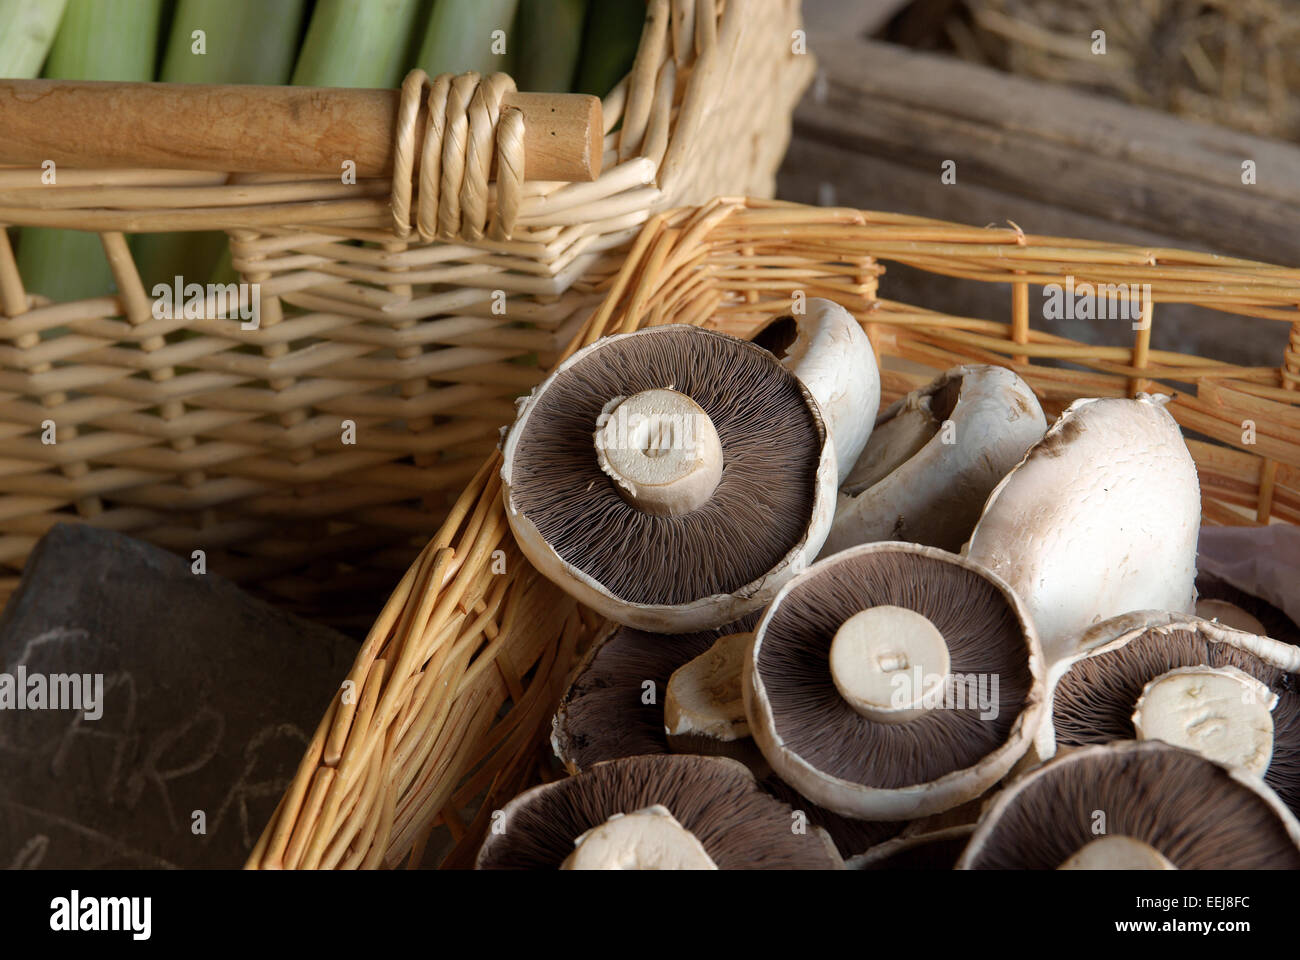 Fresh mushrooms and vegetables on sale in wicker baskets at a rural farm shop Stock Photo